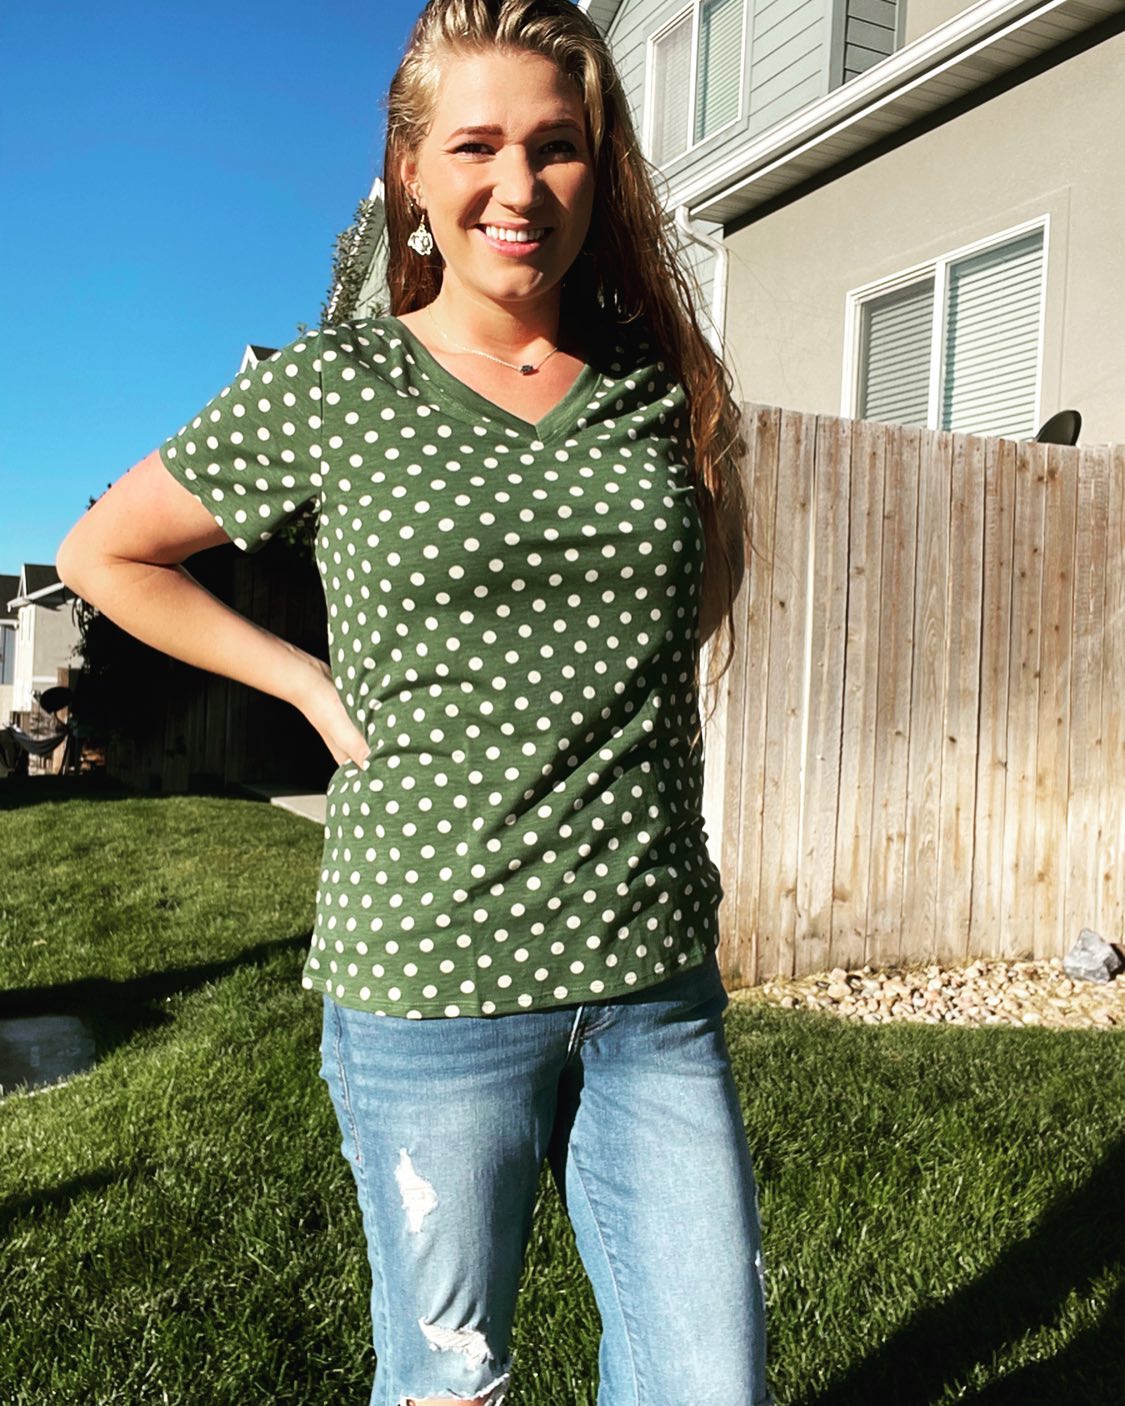 The TLC star has been keeping fans updated with photos of her noticeably slimmer figure on Instagram